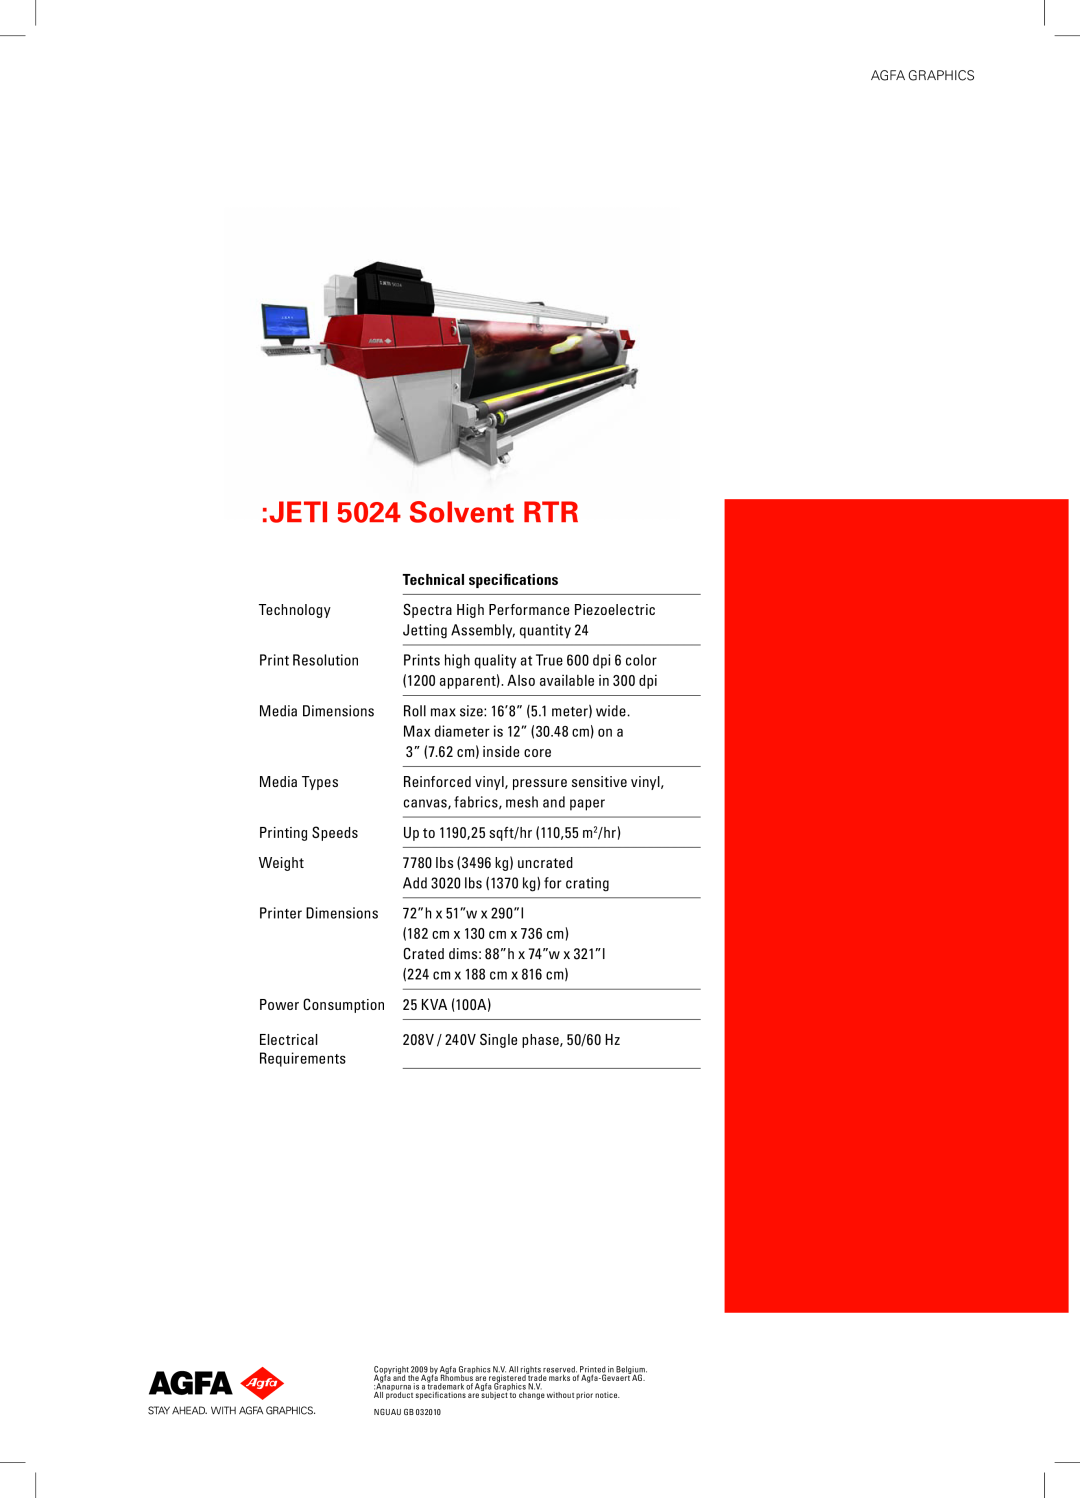 AGFA manual JETI 5024 Solvent RTR, Technical specifications 